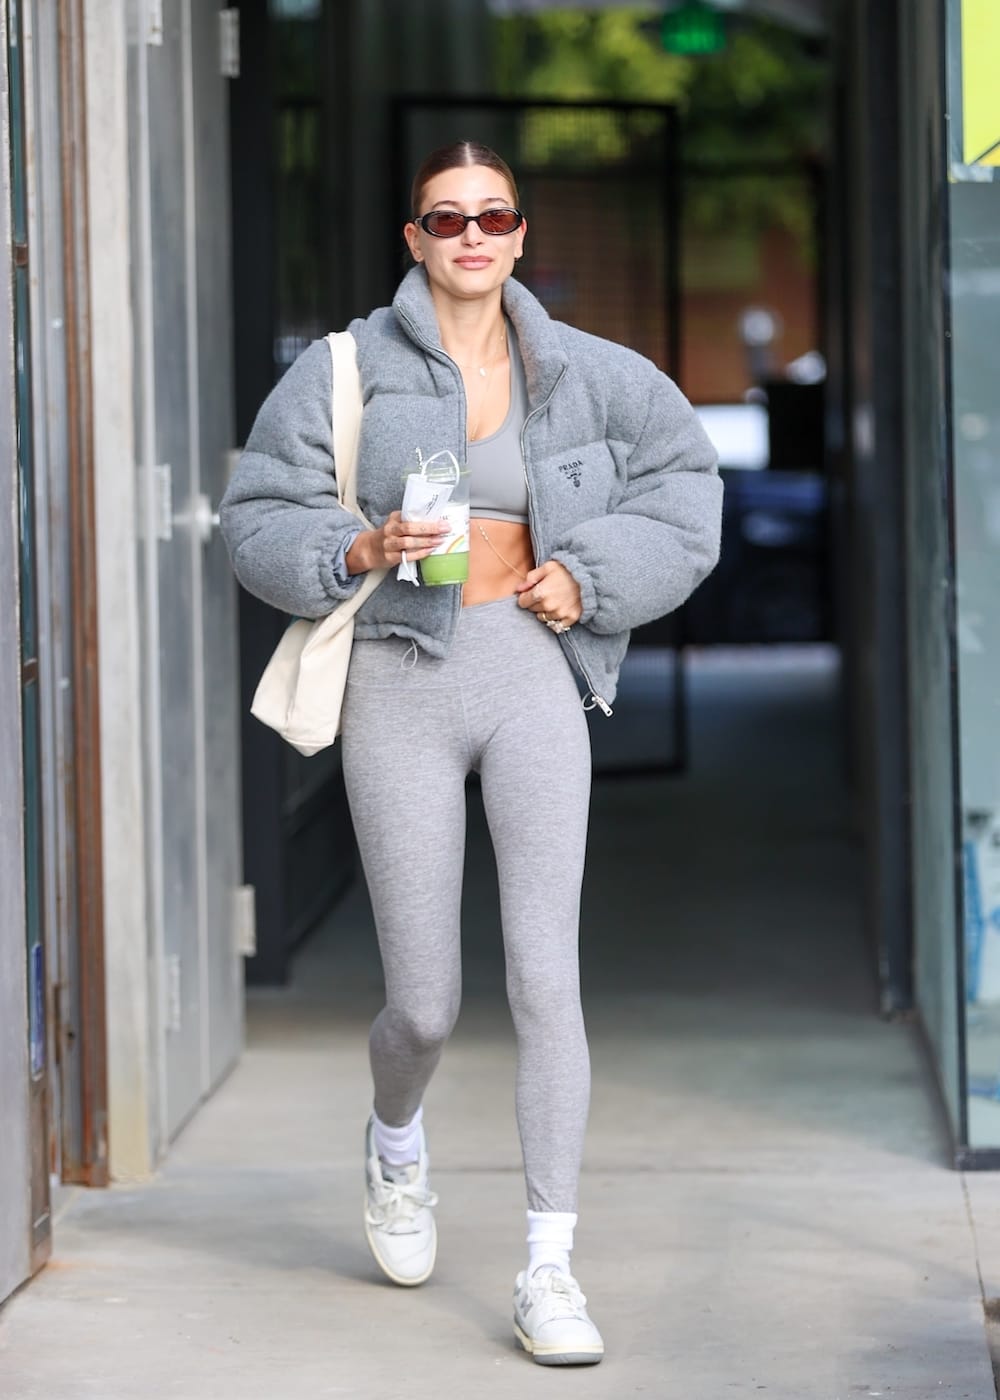 Lovely Hailey Bieber Workout Outfit Leaving Pilates Class in Los Angeles